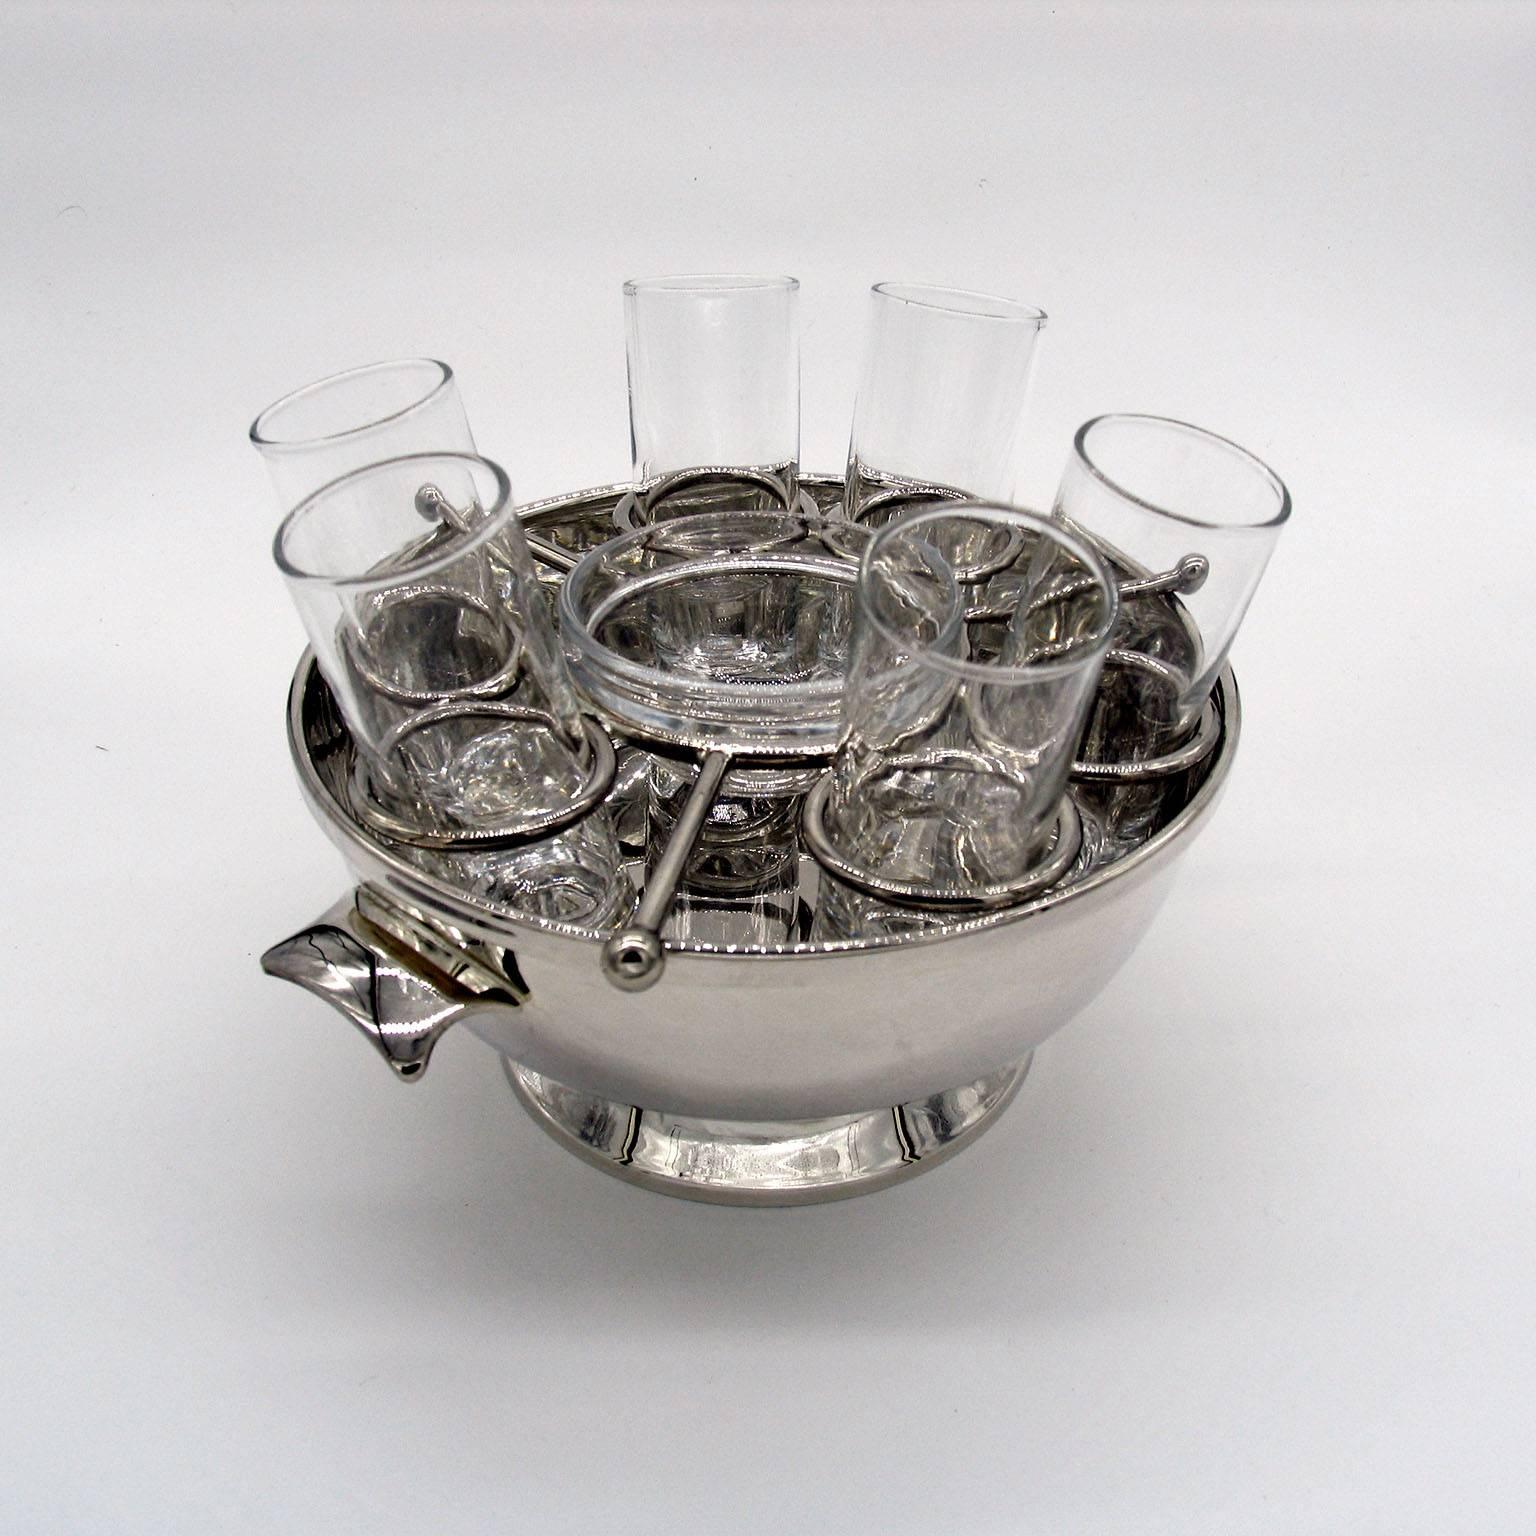 A beautiful, finely shaped Art Deco caviar and vodka silver plated server, comprising a bowl with six vodka glasses and a central glass bowl for caviar. The bowls interior allows you to fill it with crushed ice to keep the glasses and caviar chilled.